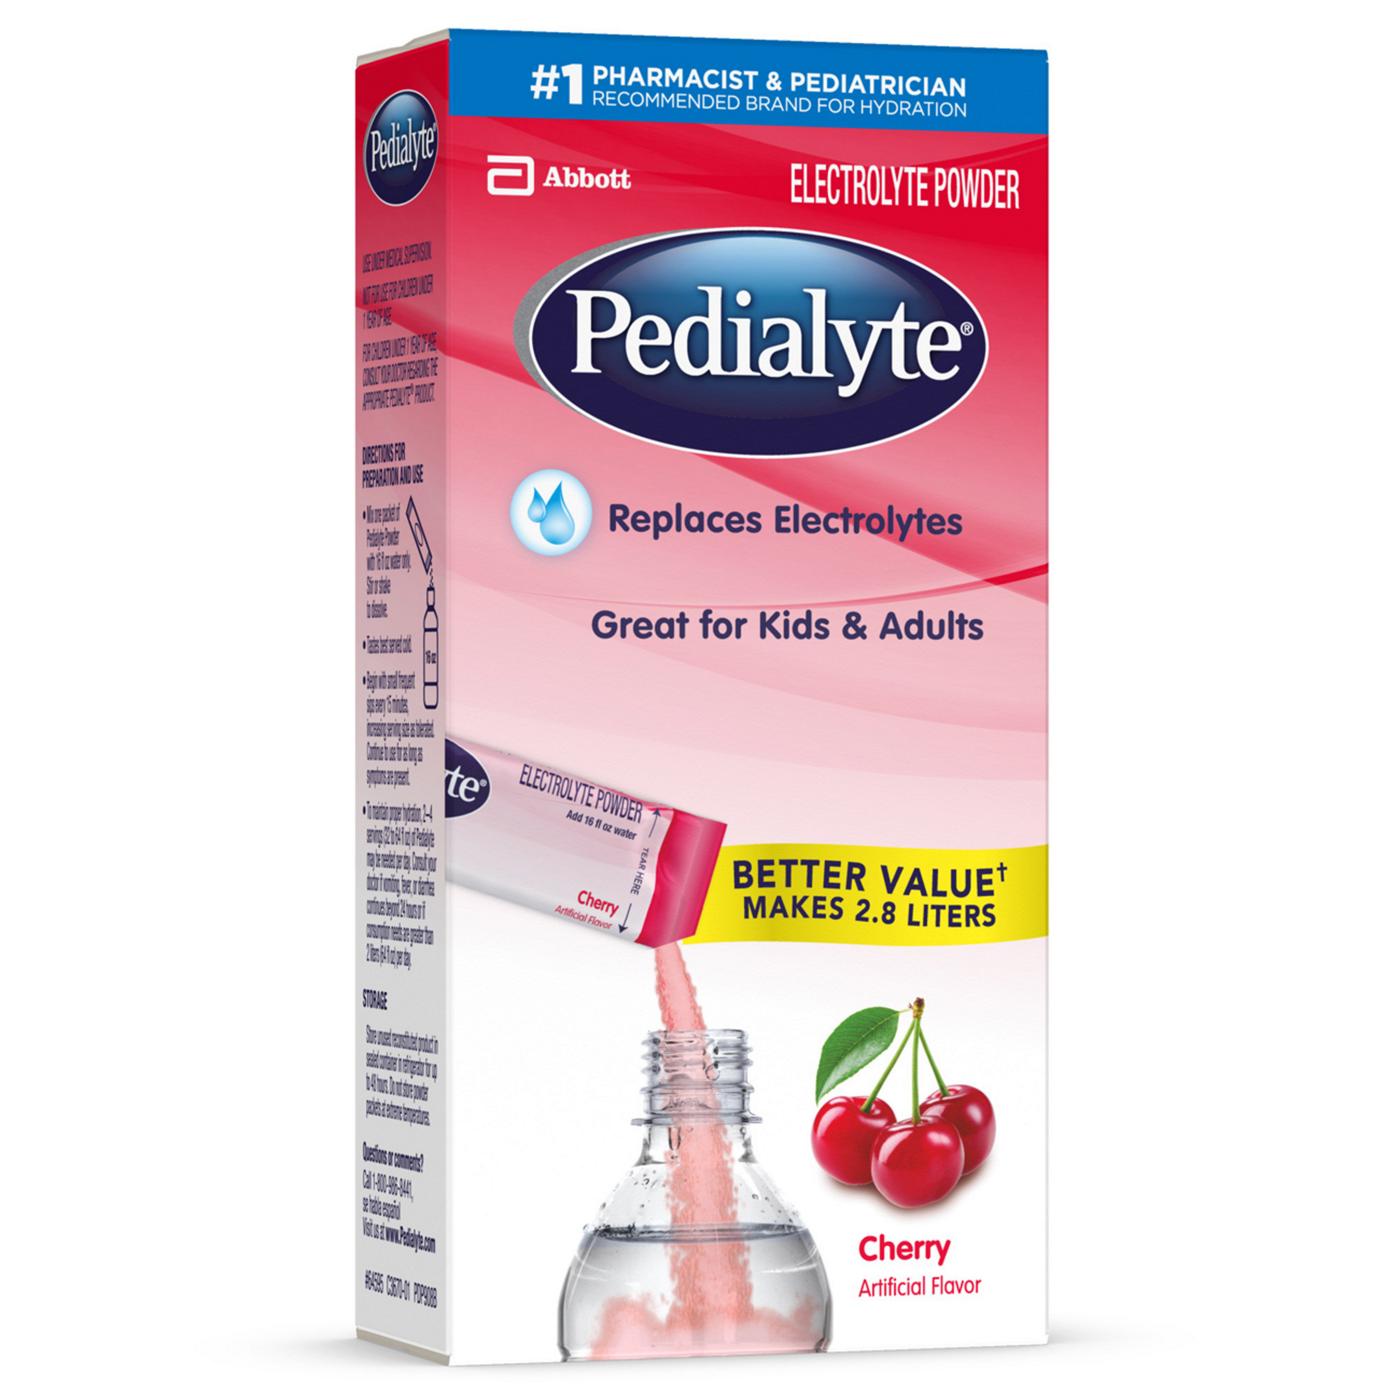 Pedialyte Electrolyte Powder Packets - Cherry; image 6 of 7